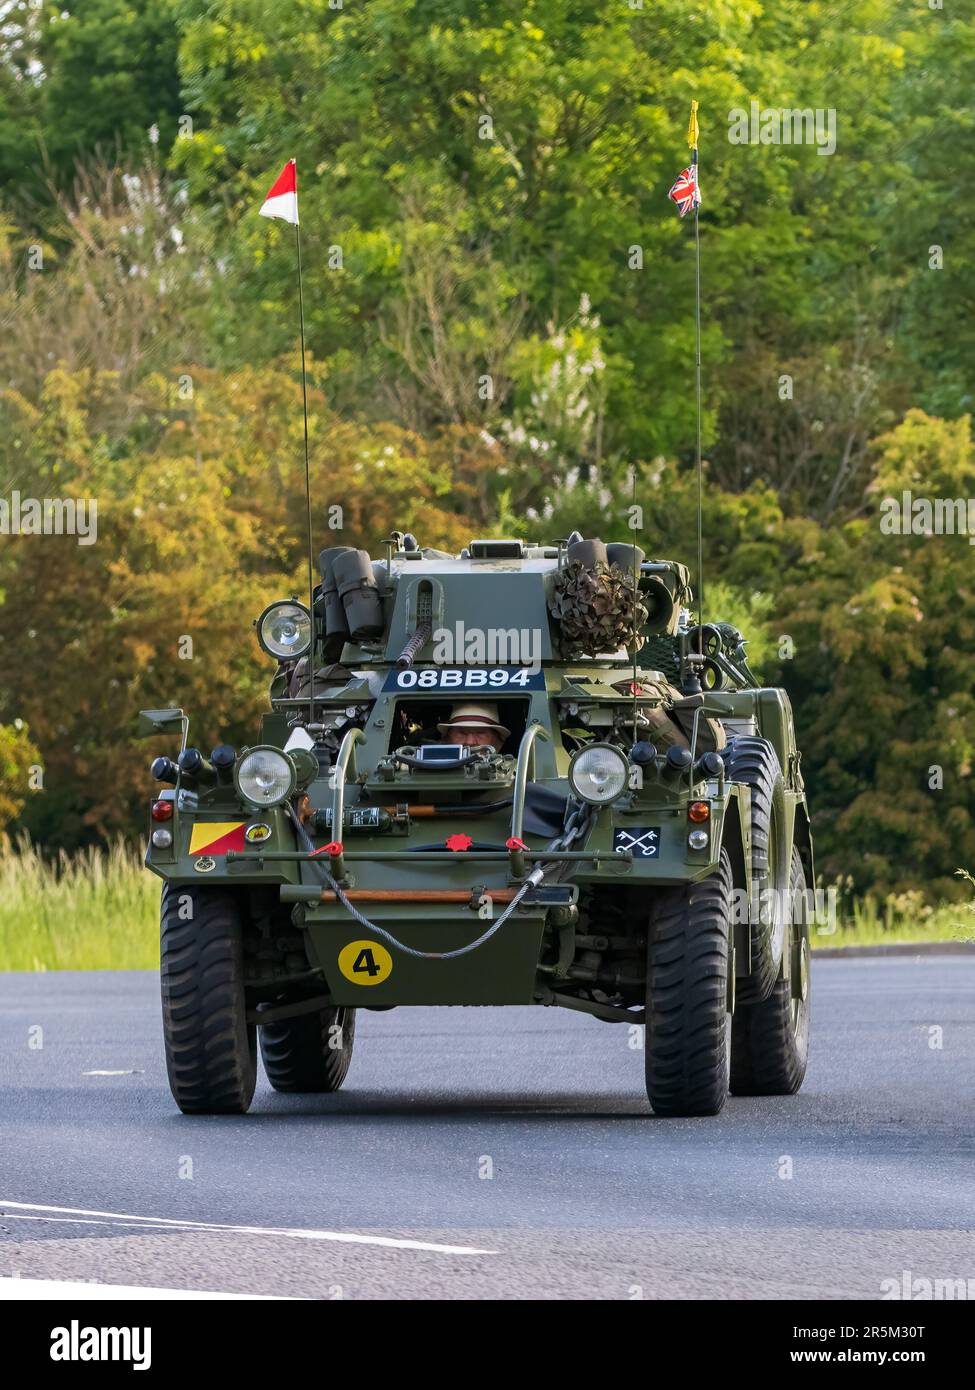 Stony Stratford,UK - June 4th 2023: 1958 ex army Daimler Ferret Scout Car travelling on an English country road. Stock Photo